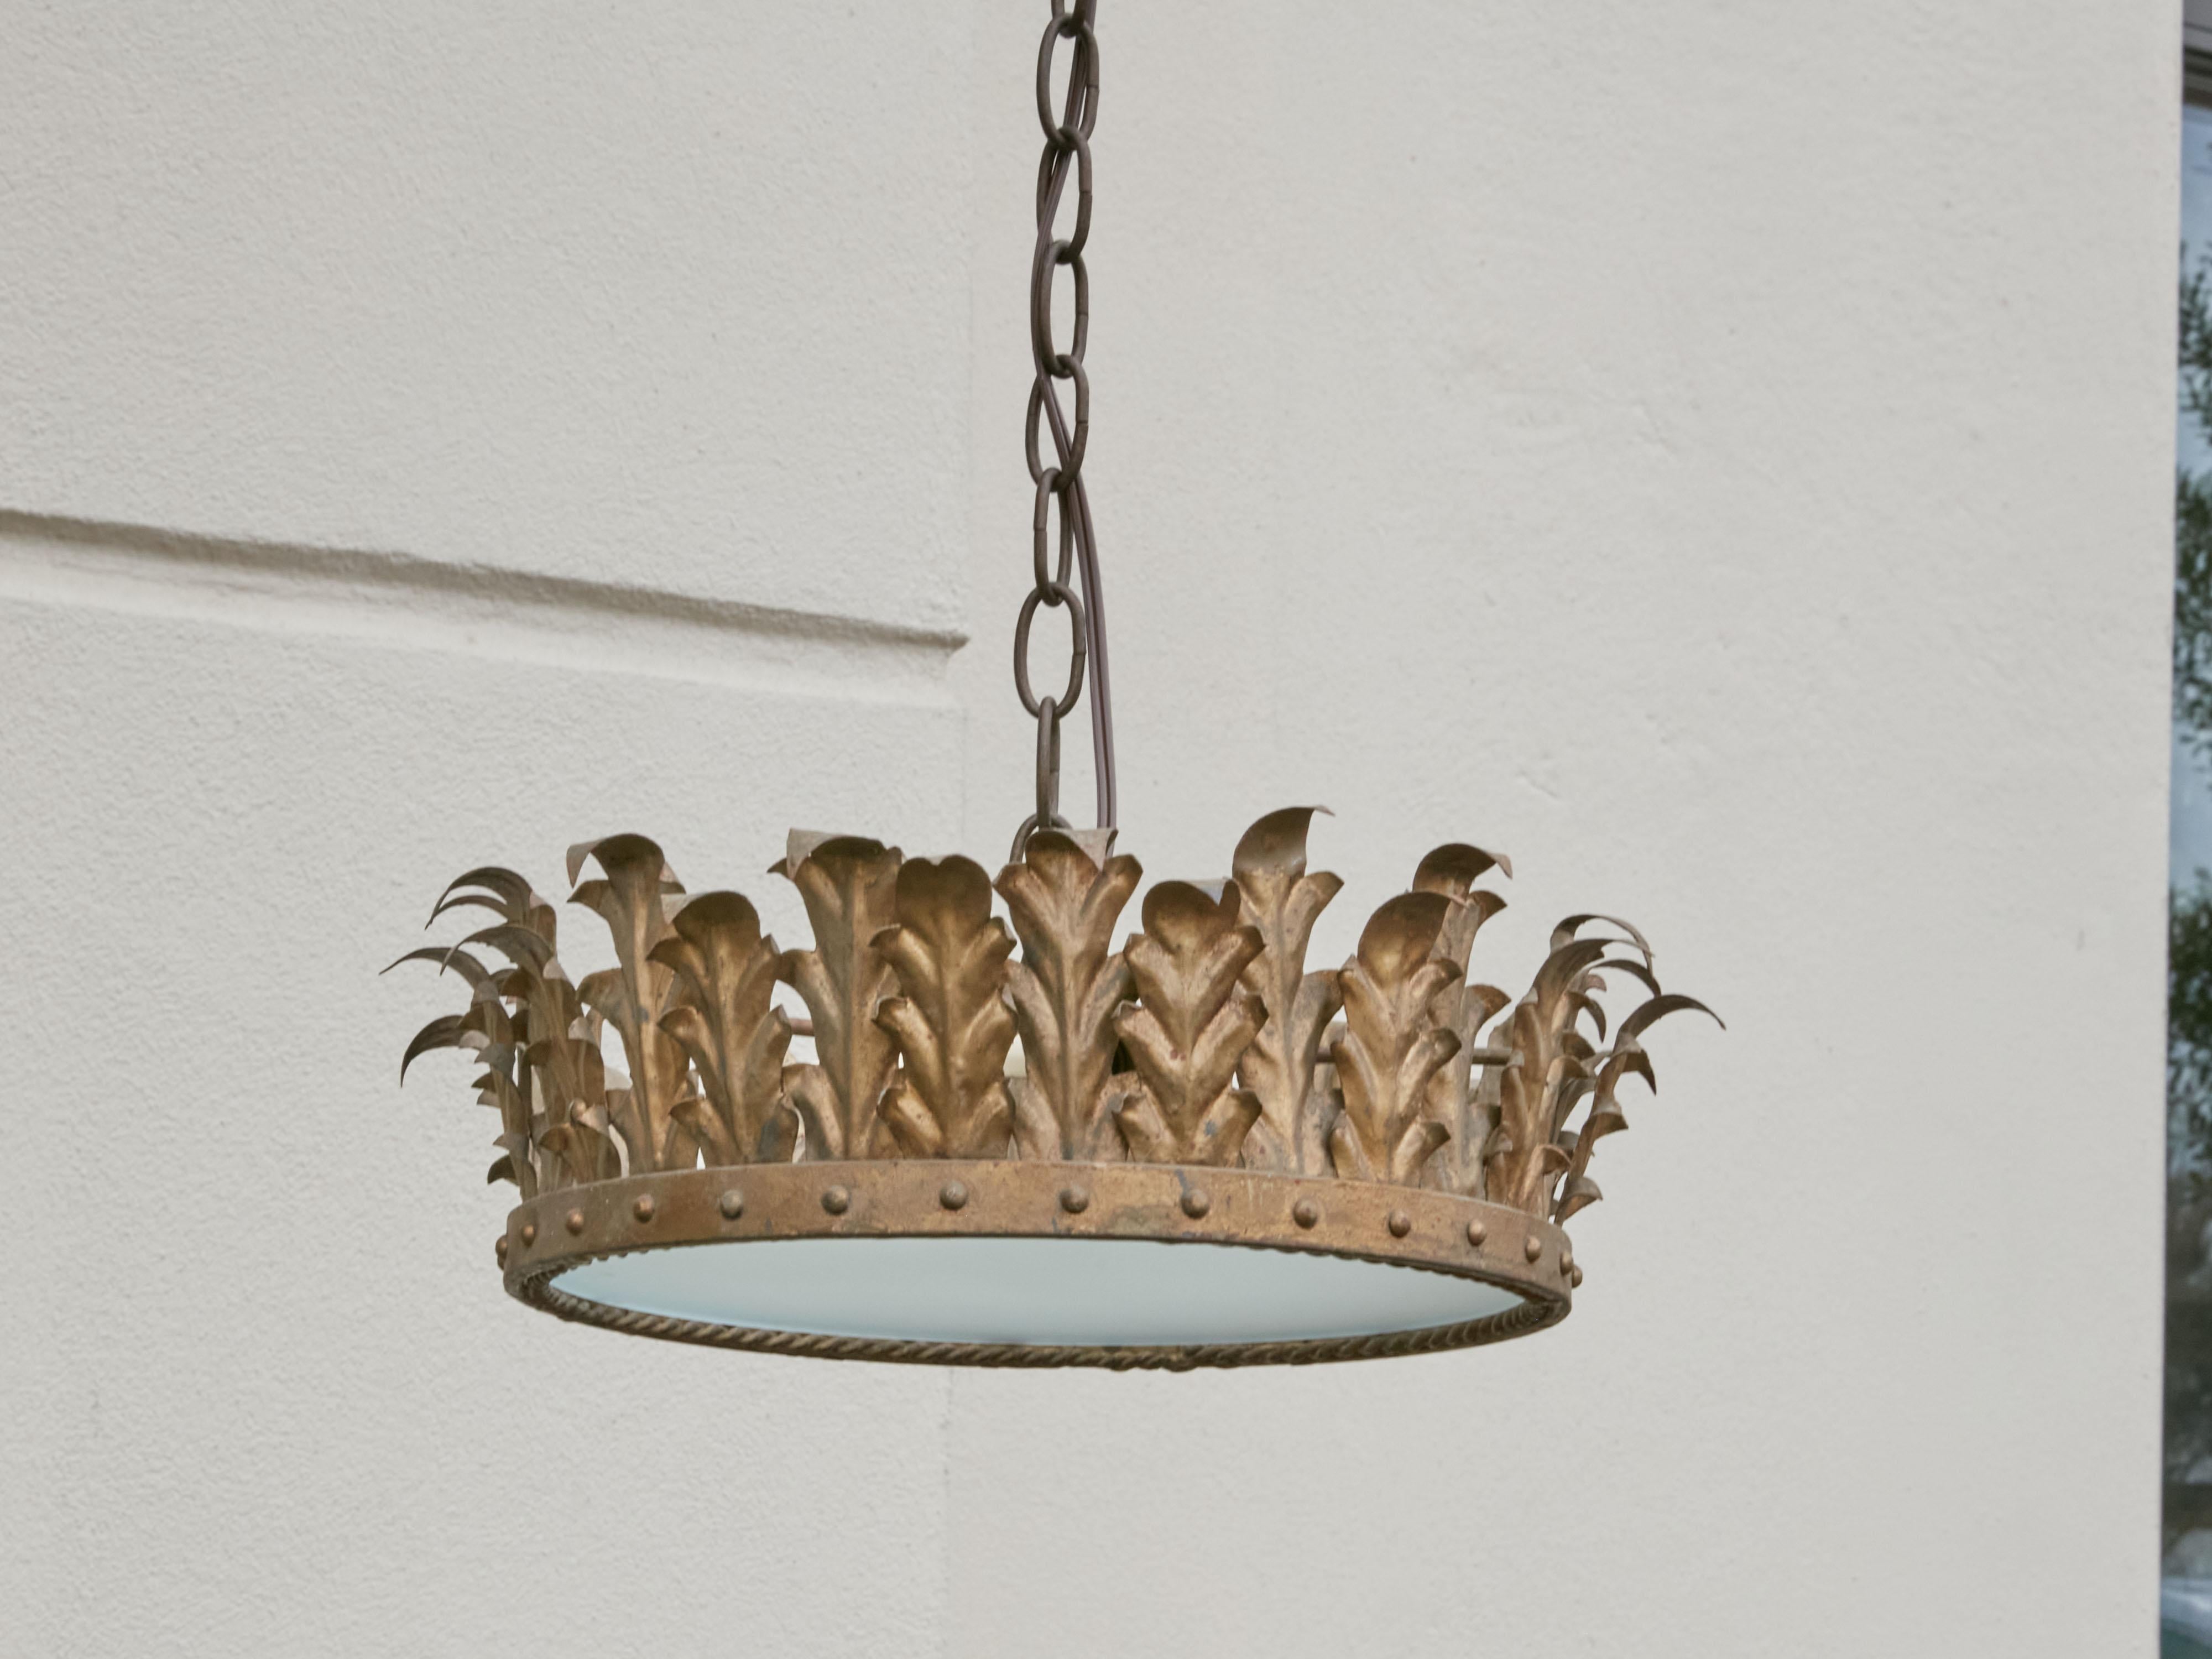 A Spanish vintage gilt metal three-bulb semi-flush crown light fixture from the mid-20th century, with frosted glass and new wiring. Created in Spain during the midcentury period, this crown chandelier features a decor of curving gilt metal foliage,